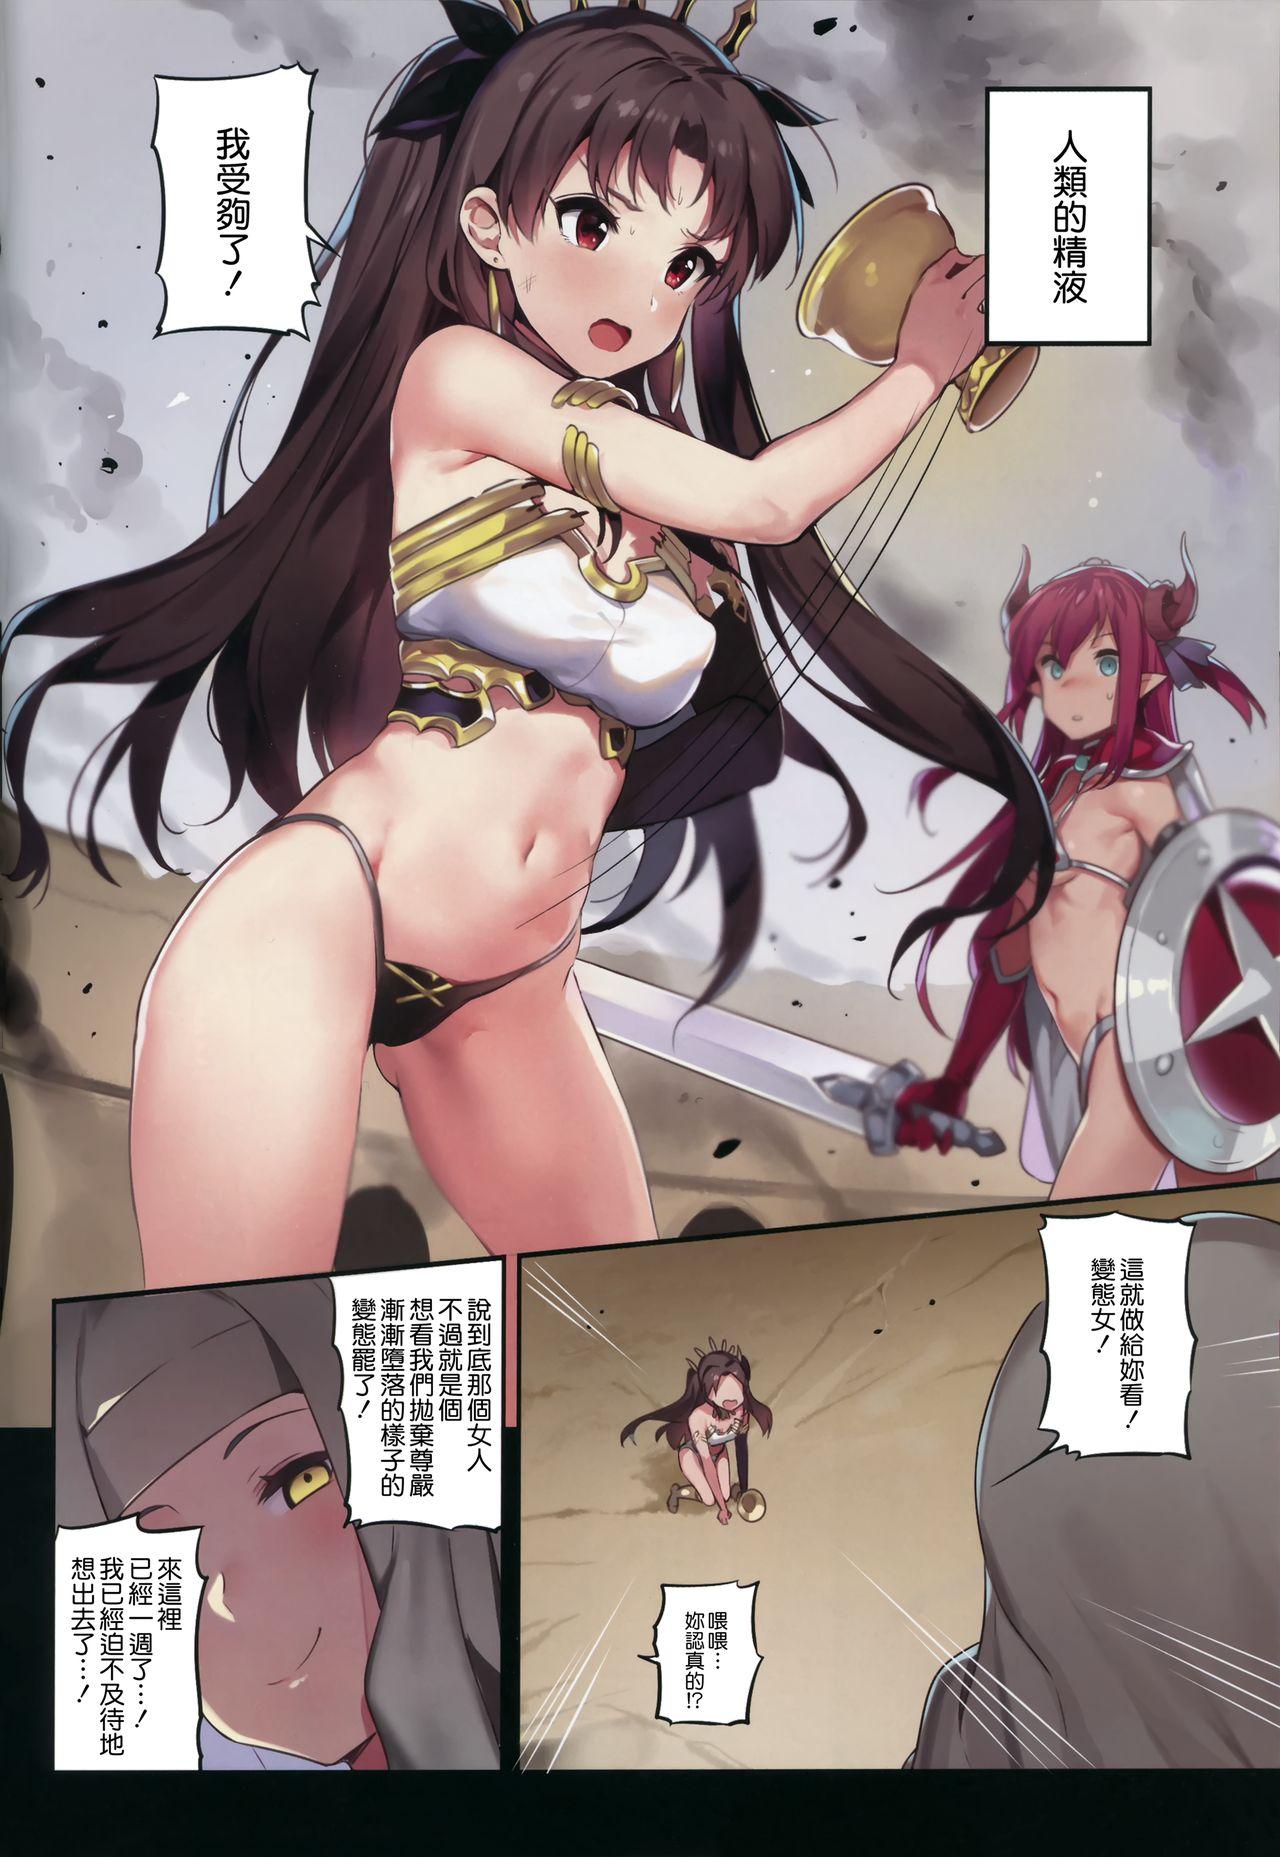 Gaysex Moon Phase Material 2 - Fate grand order Black Woman - Page 7